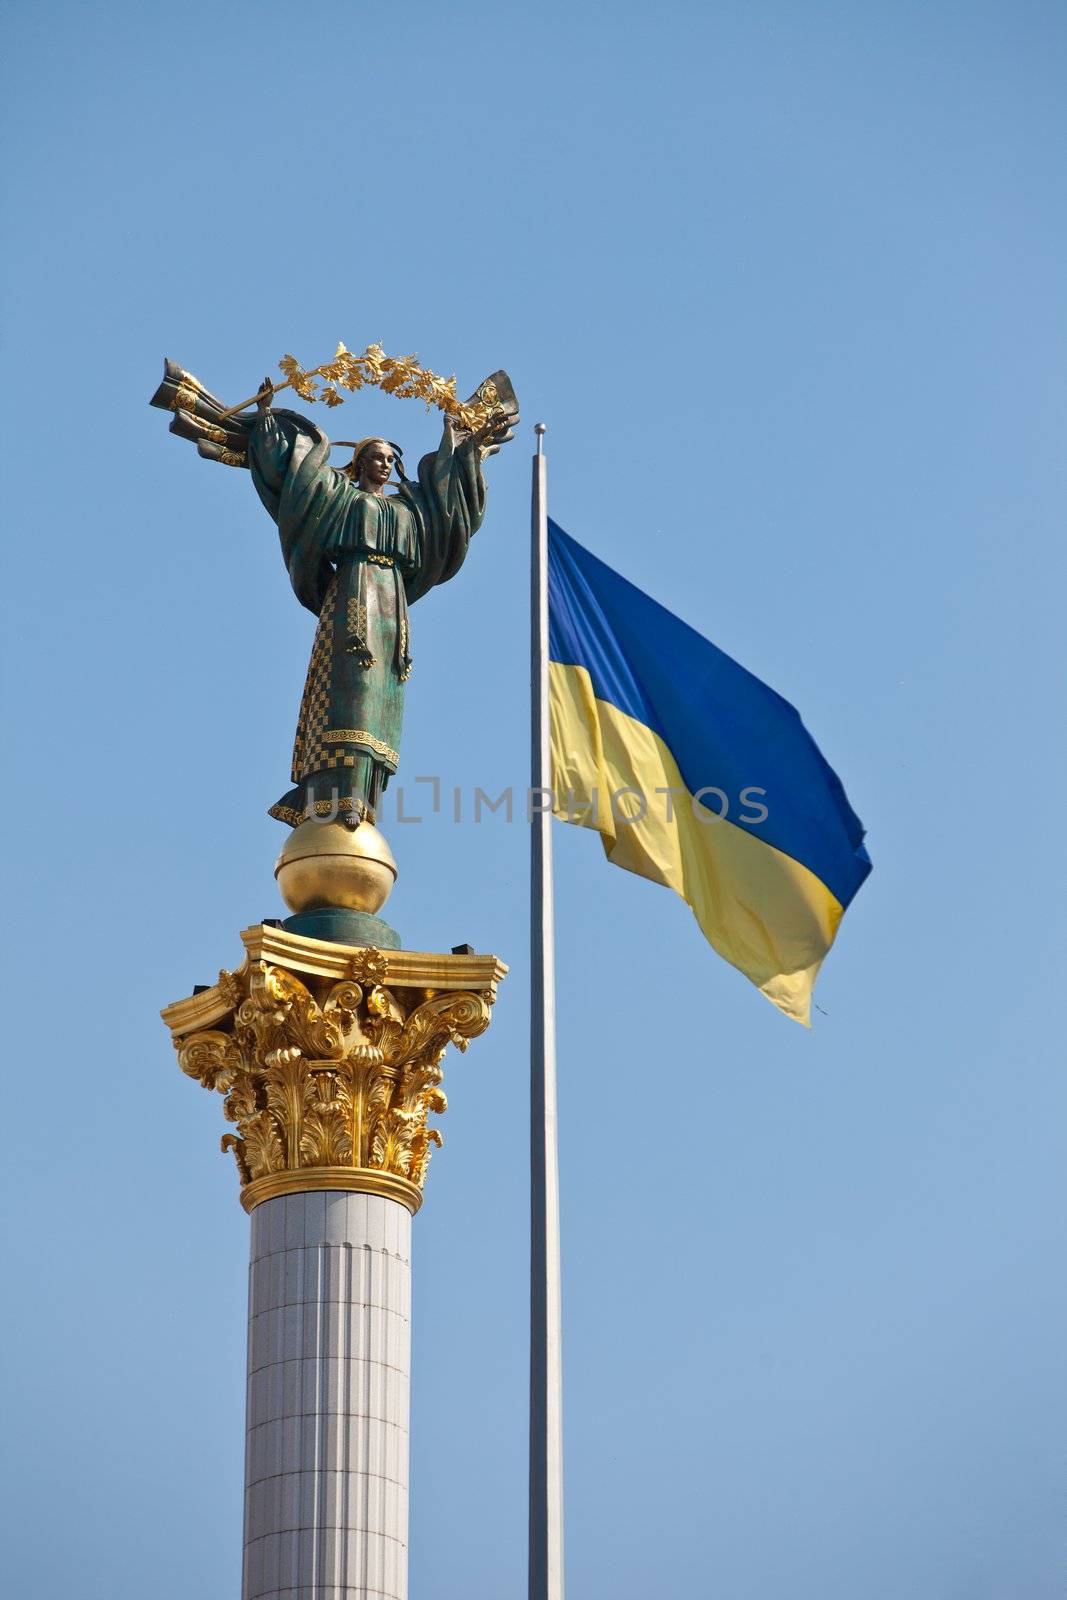 The Independence monument and ukrainian flag in Kiev, Ukraine, E by bloodua